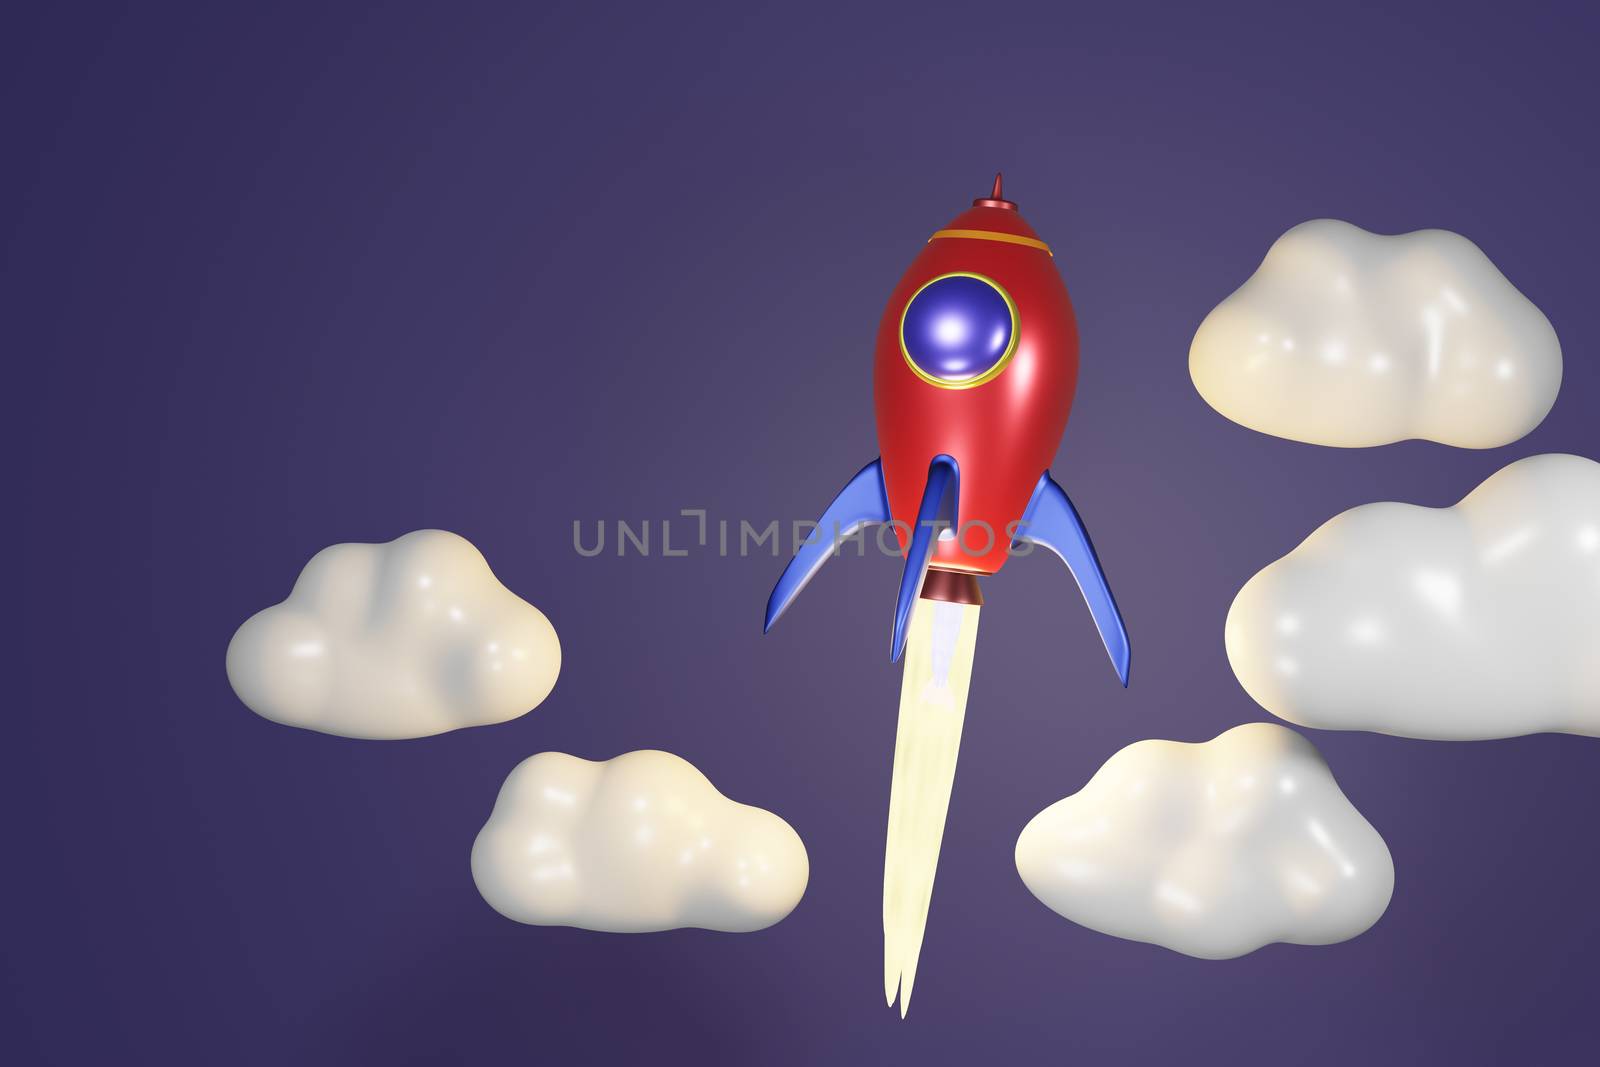 Ballistic launch red rocket with cloud on dark blue background, by sirawit99